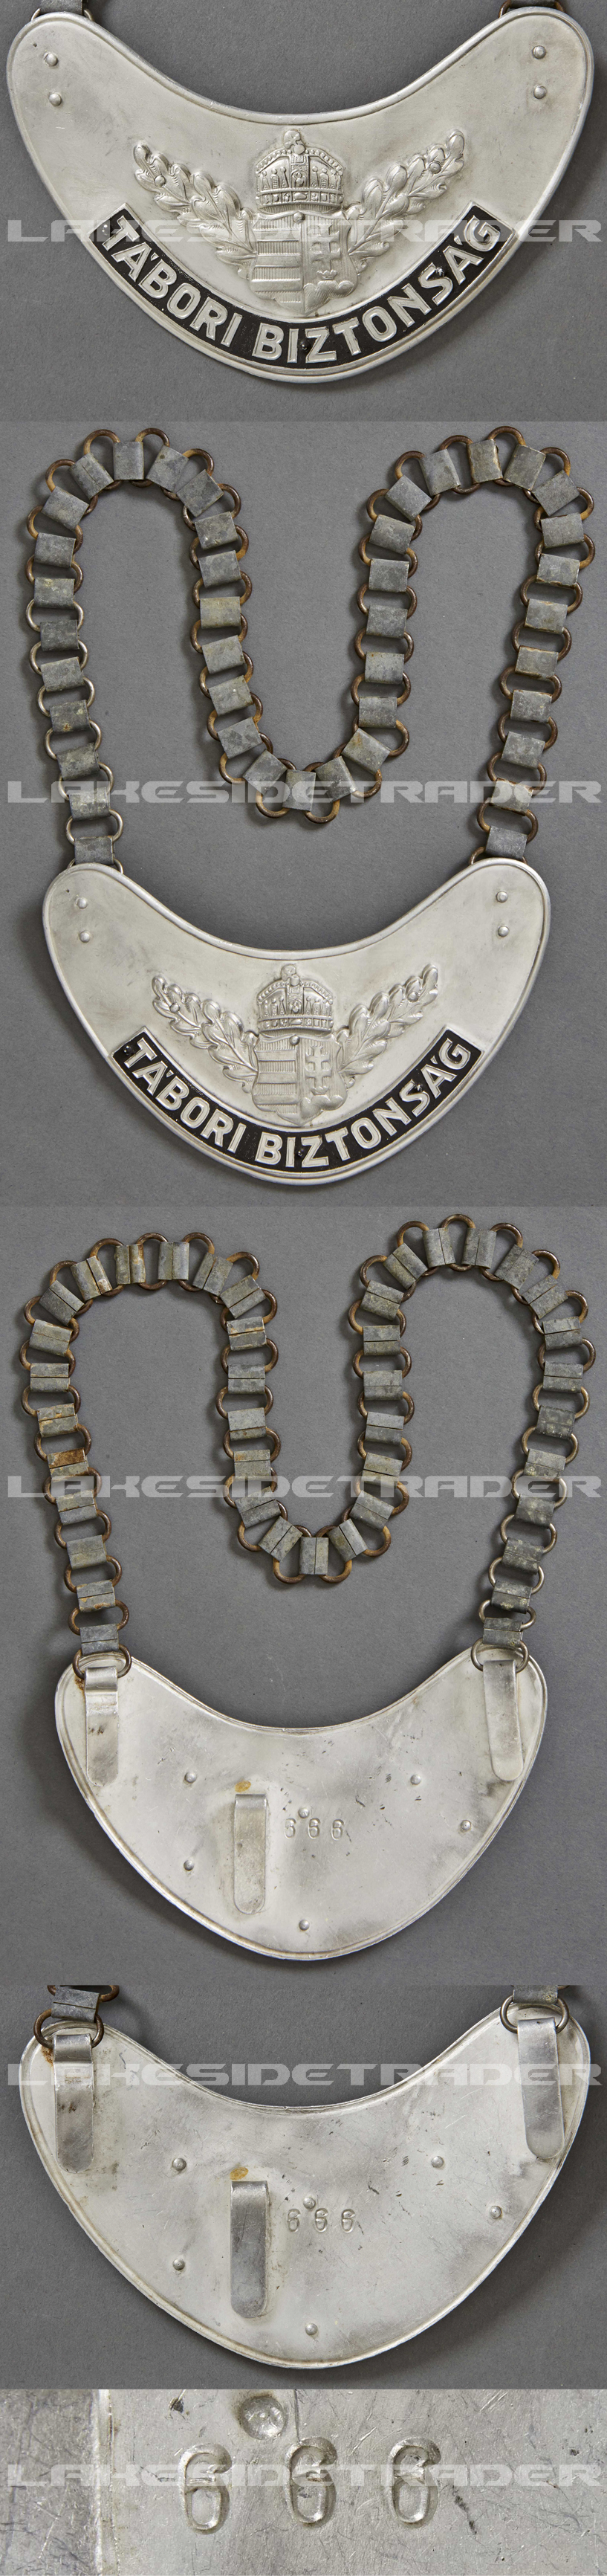 A Gorget of the Hungarian (Army) Military Police